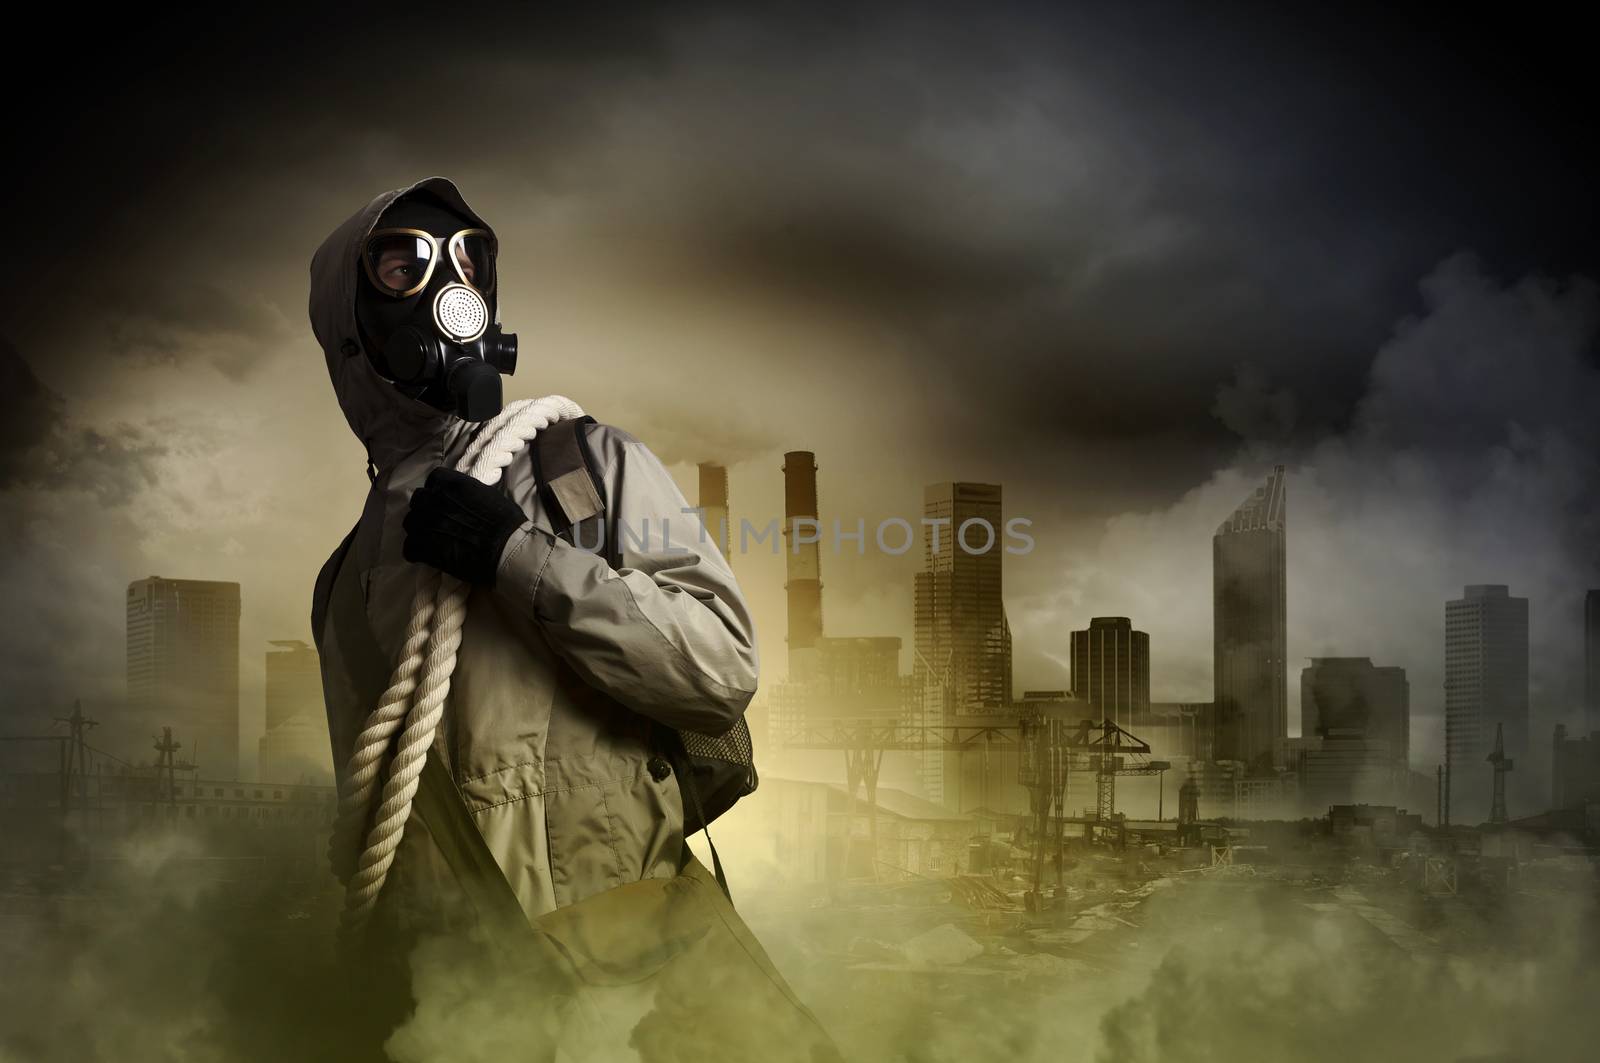 Stalker against nuclear background. Disaster and pollution